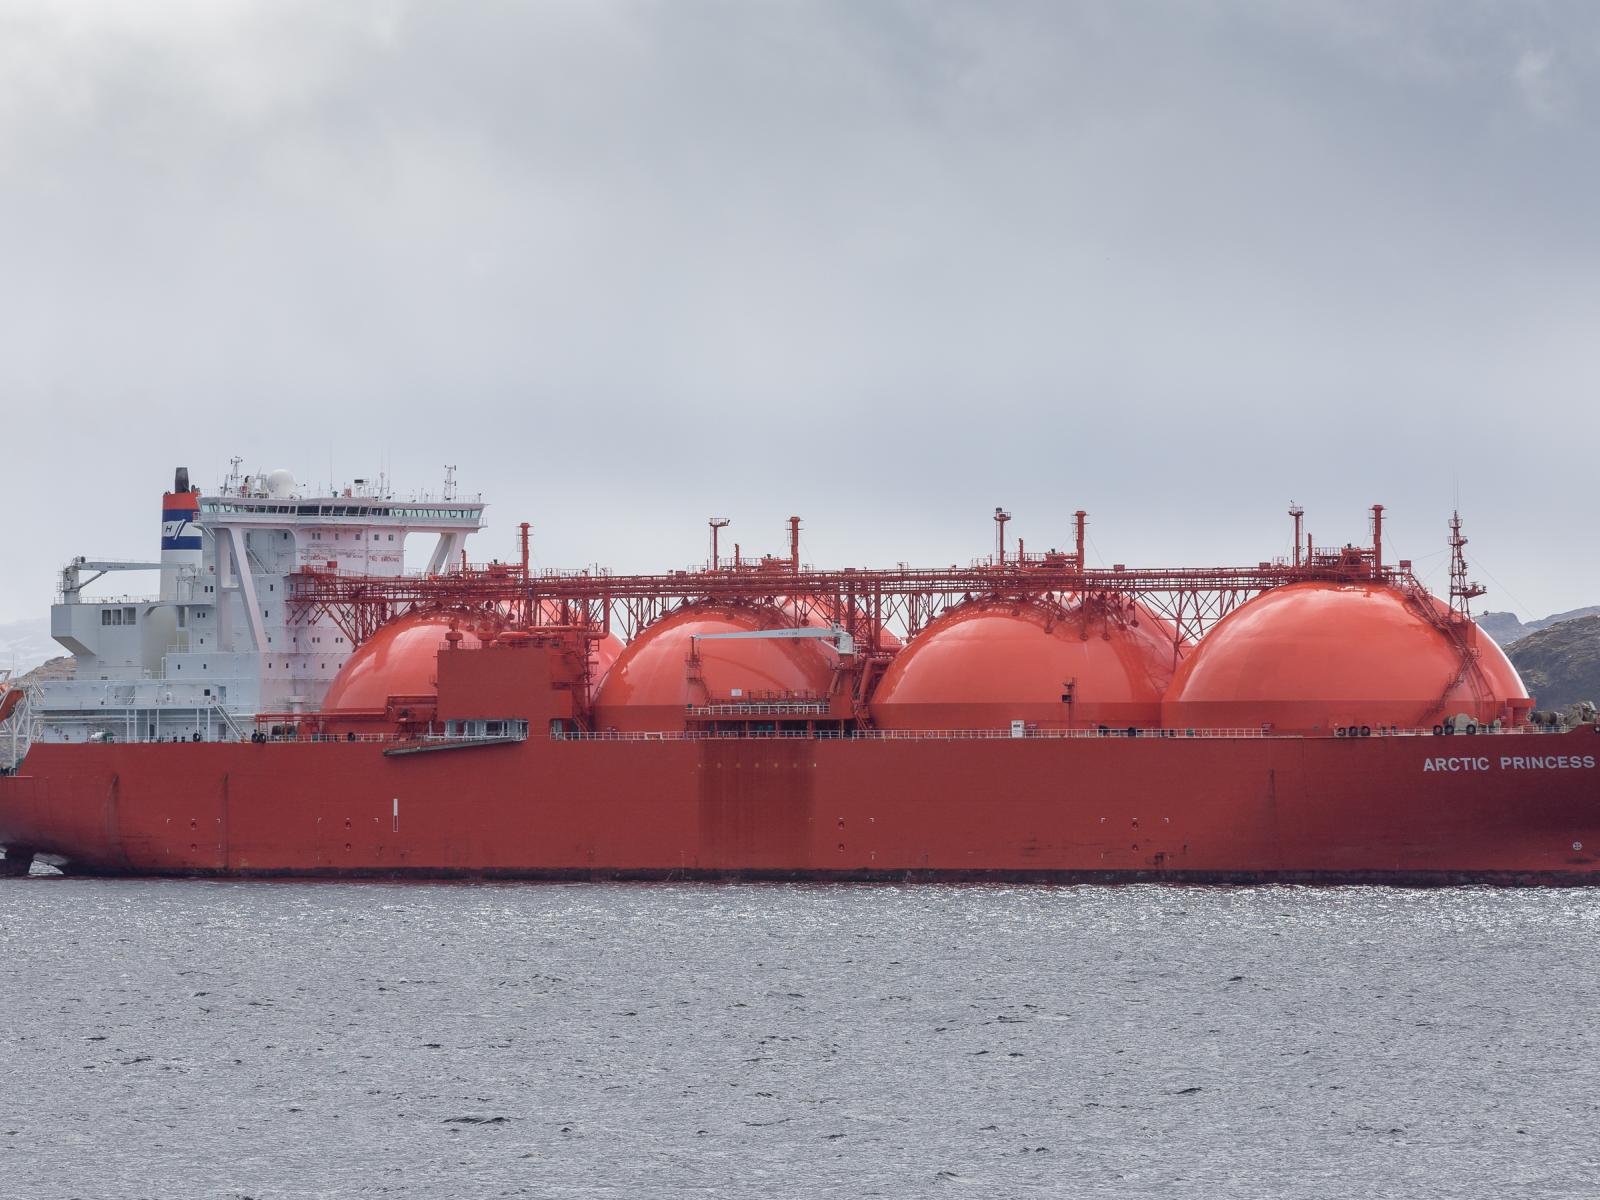 Photo of a large ship, used to transport liquefied natural gas, at sea. The name “Arctic Princess” is written on the side of it.